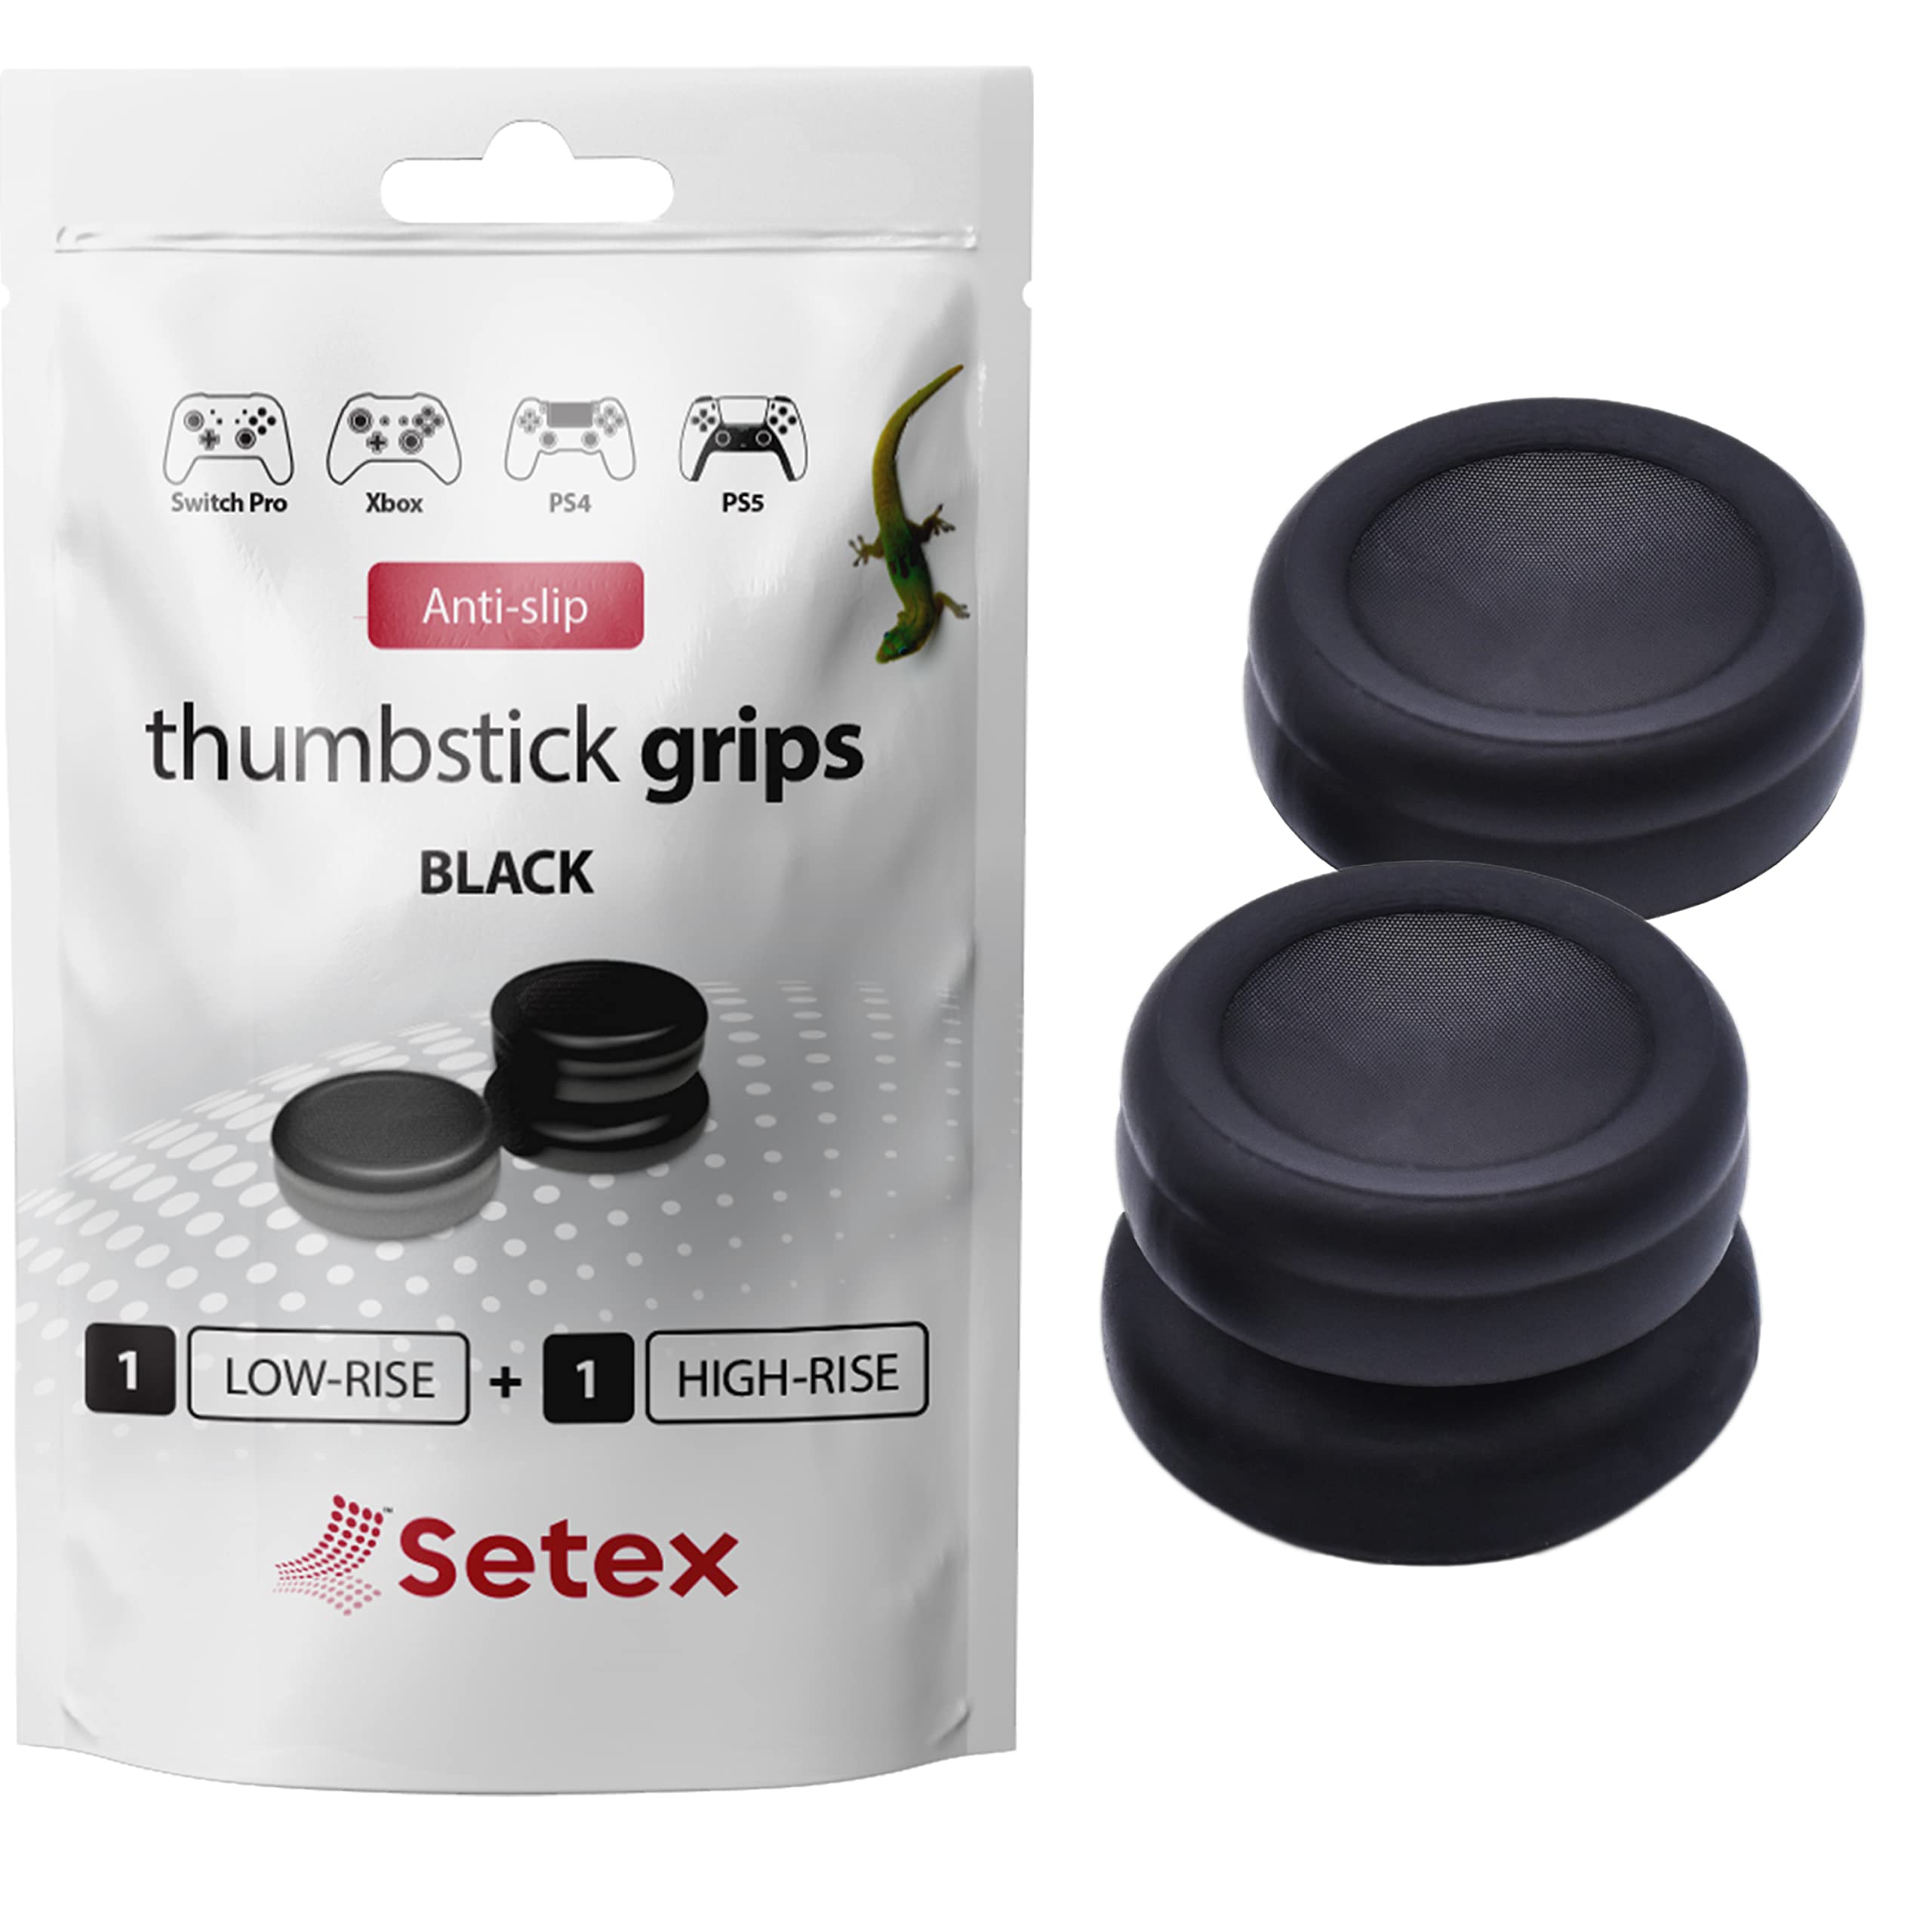 Setex Gecko Grip, 1 High Rise + 1 Low Rise Thumbstick Grip Covers, for Playstation PS5, PS4, Xbox One, Switch Pro, Steam Deck, Anti-Slip Microstructured Analog Stick Thumb Grips, Black, Covers Only